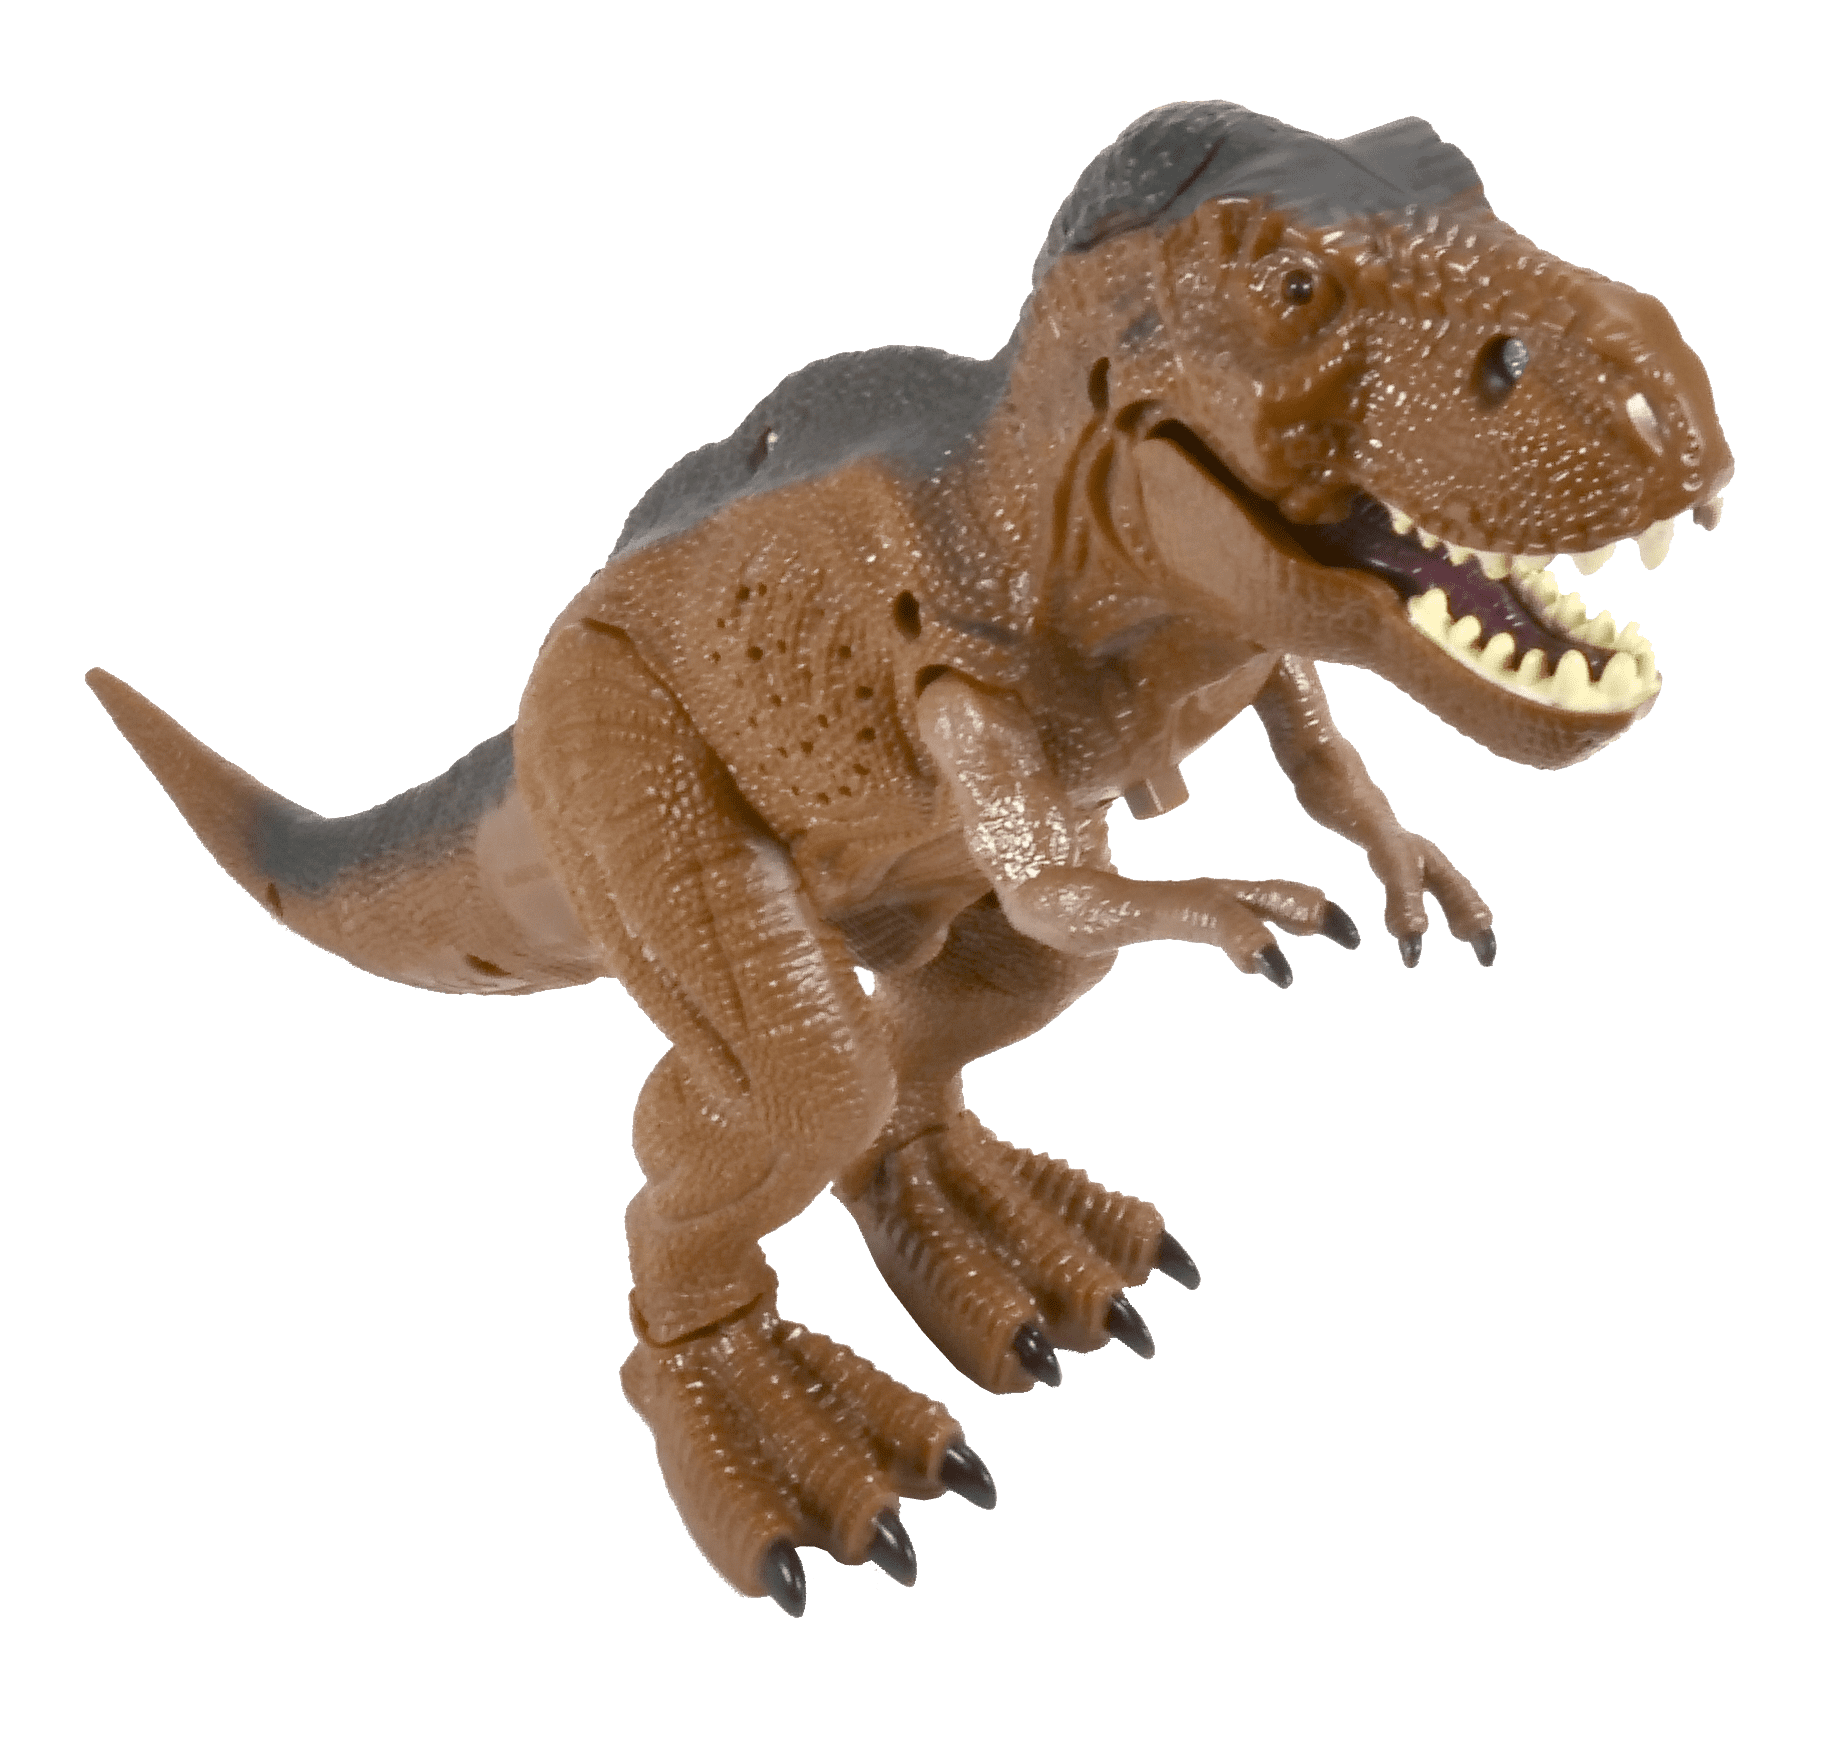 Details about   LOT OF 6 Large ASSORTED HARD PLASTIC DINOSAUR DINO FIGURES TOYS Dinosaurs 